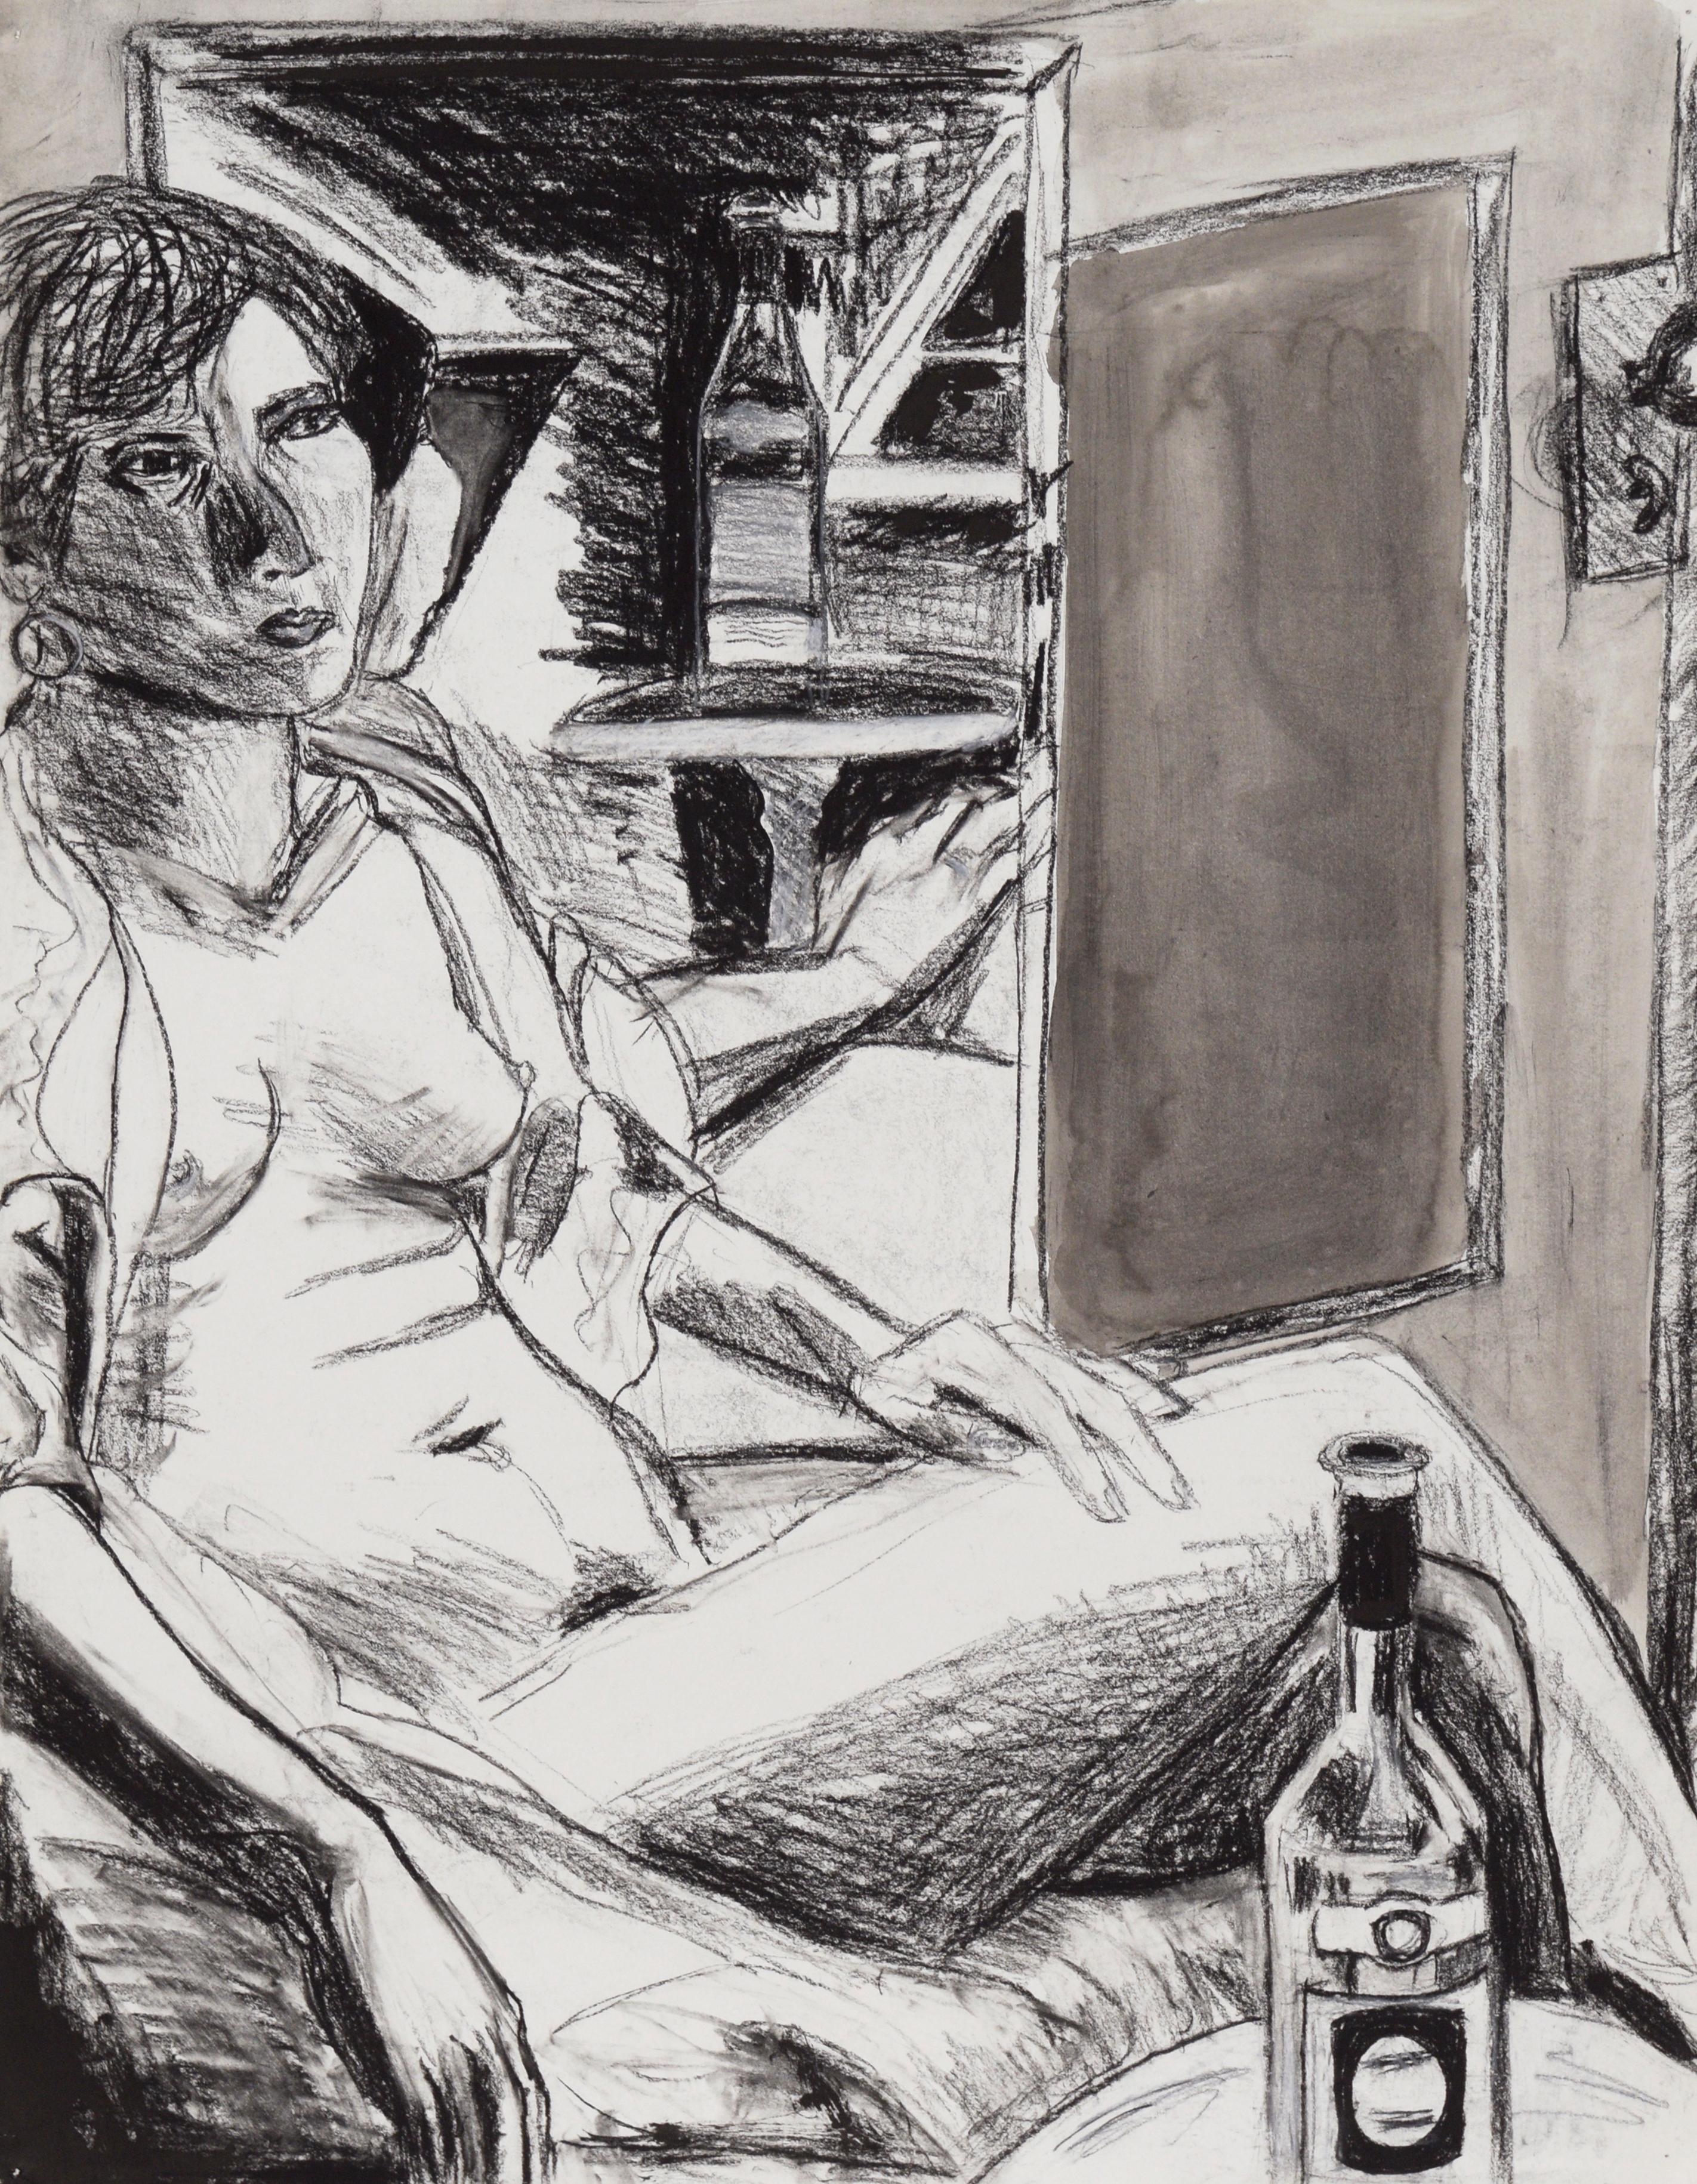 Shadow of Light - Nude Figurative Study with a Bottle of California Wine